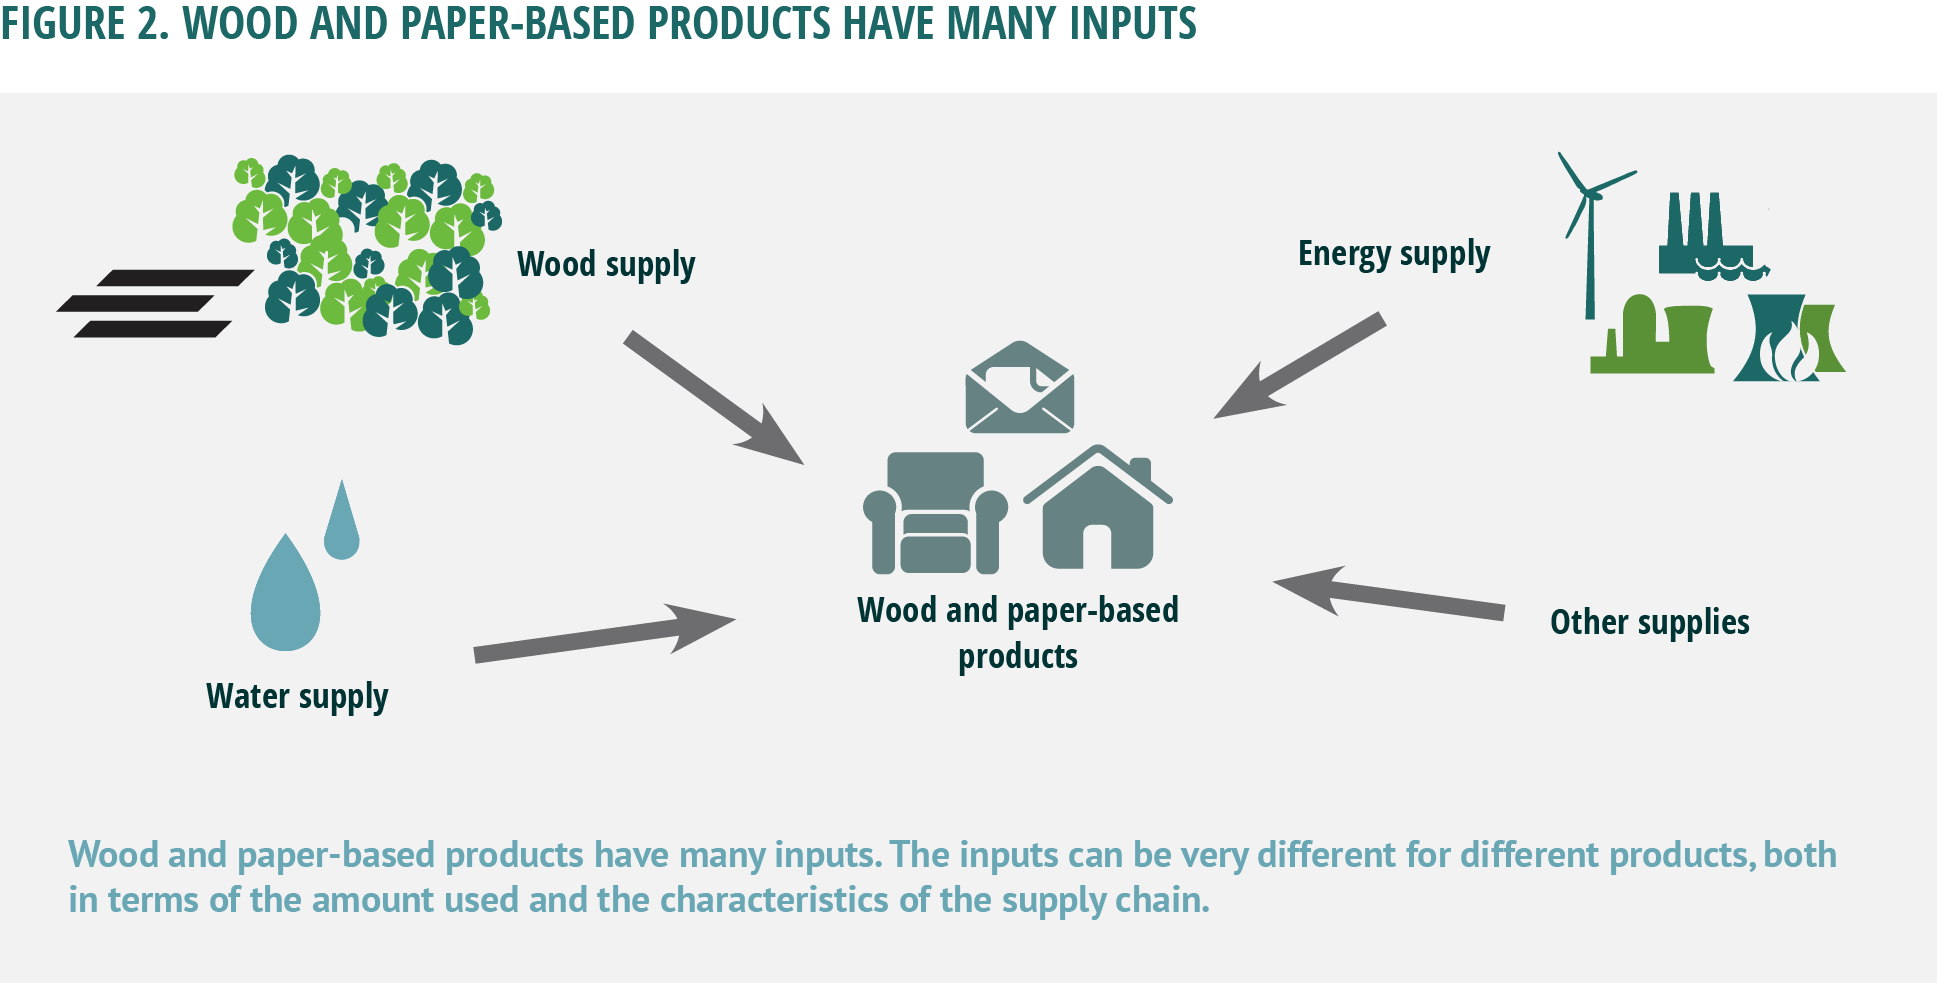 Wood and paper-based products have many inputs. The inputs can be very different for different products, both in terms of the amount used and the characteristics of the supply chain.